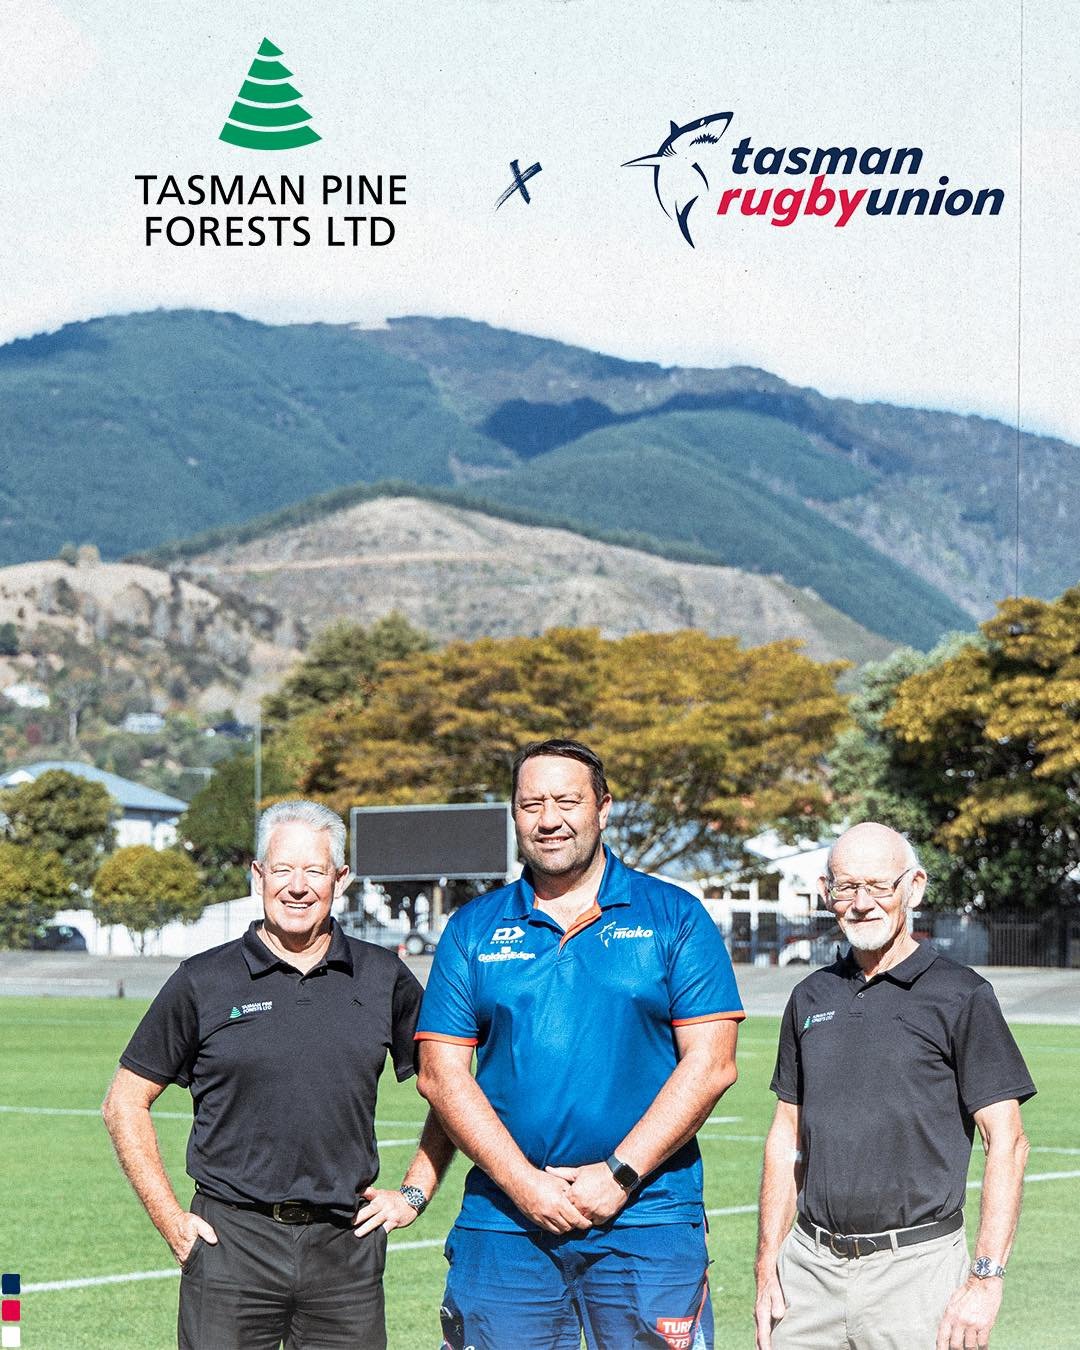 Tasman Pine Forests Limited and Tasman Rugby are delighted to announce the renewal of their partnership for another five years, reinforcing their commitment to community development and sporting excellence in the region.

#finzup